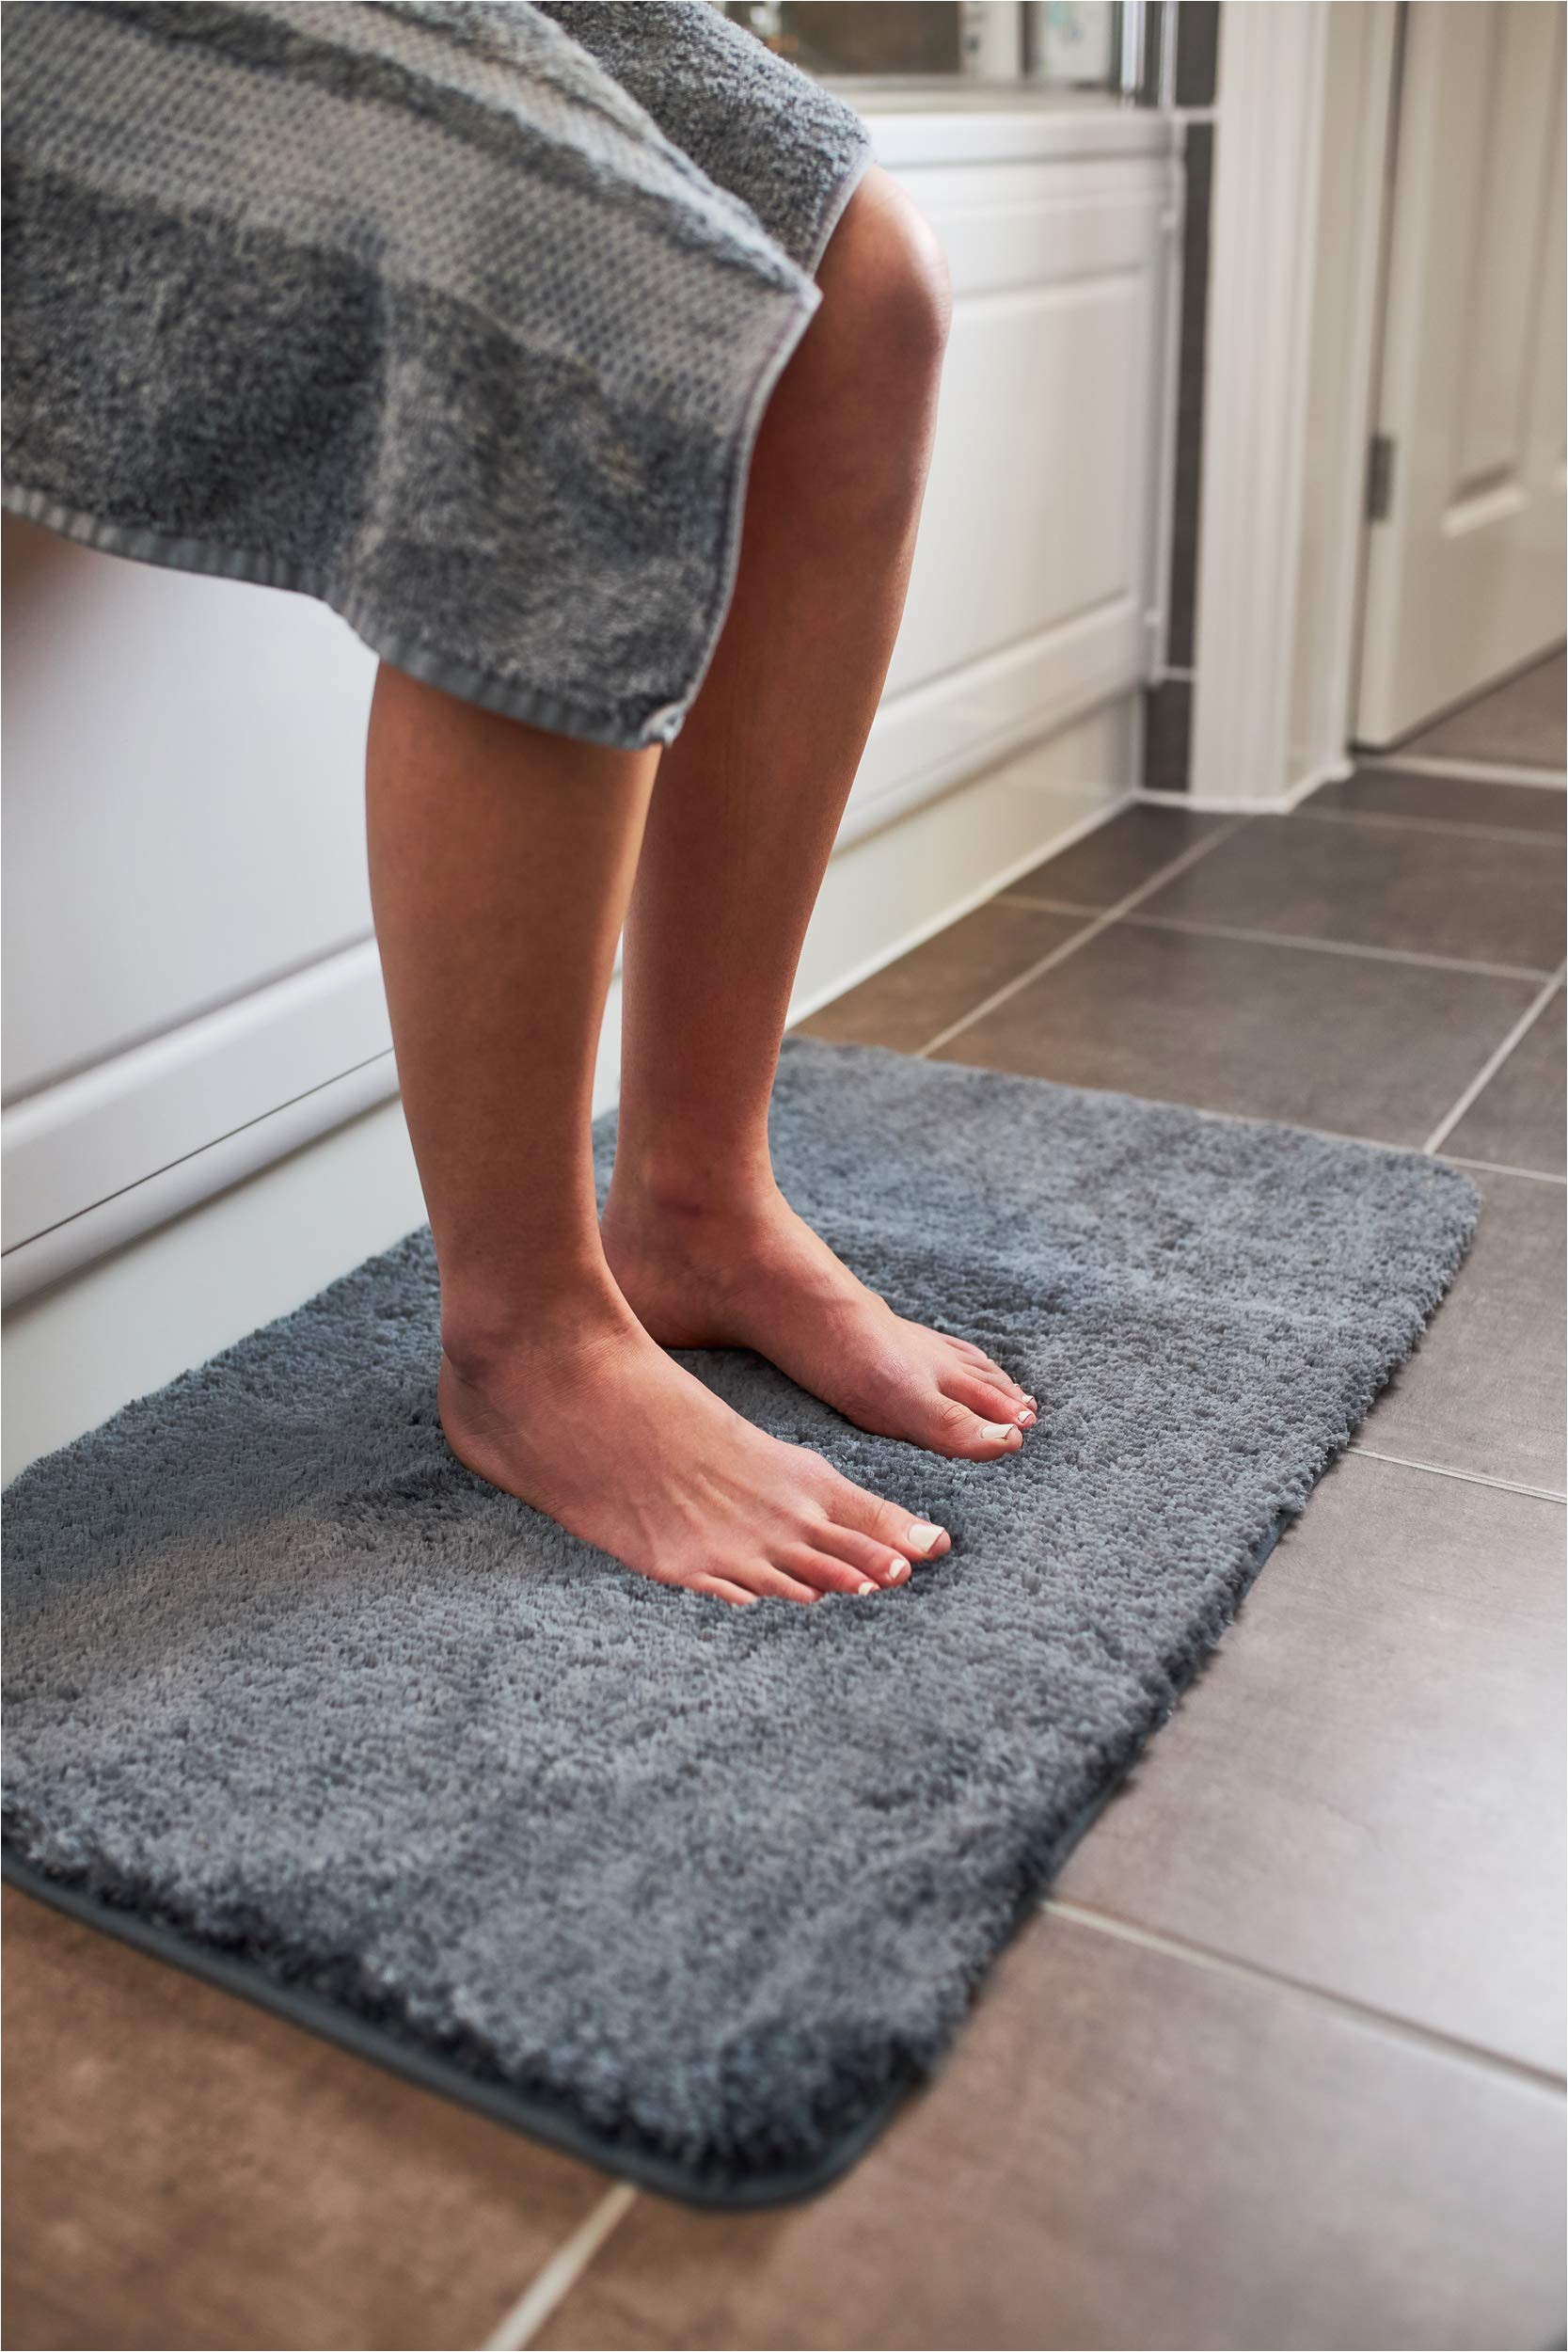 Best Bath Rugs Reviews Luxury Grey Bath Mat Microfiber Non Slip Bath Rug with Super soft Absorbent Dry Fast Design for Bath and Shower